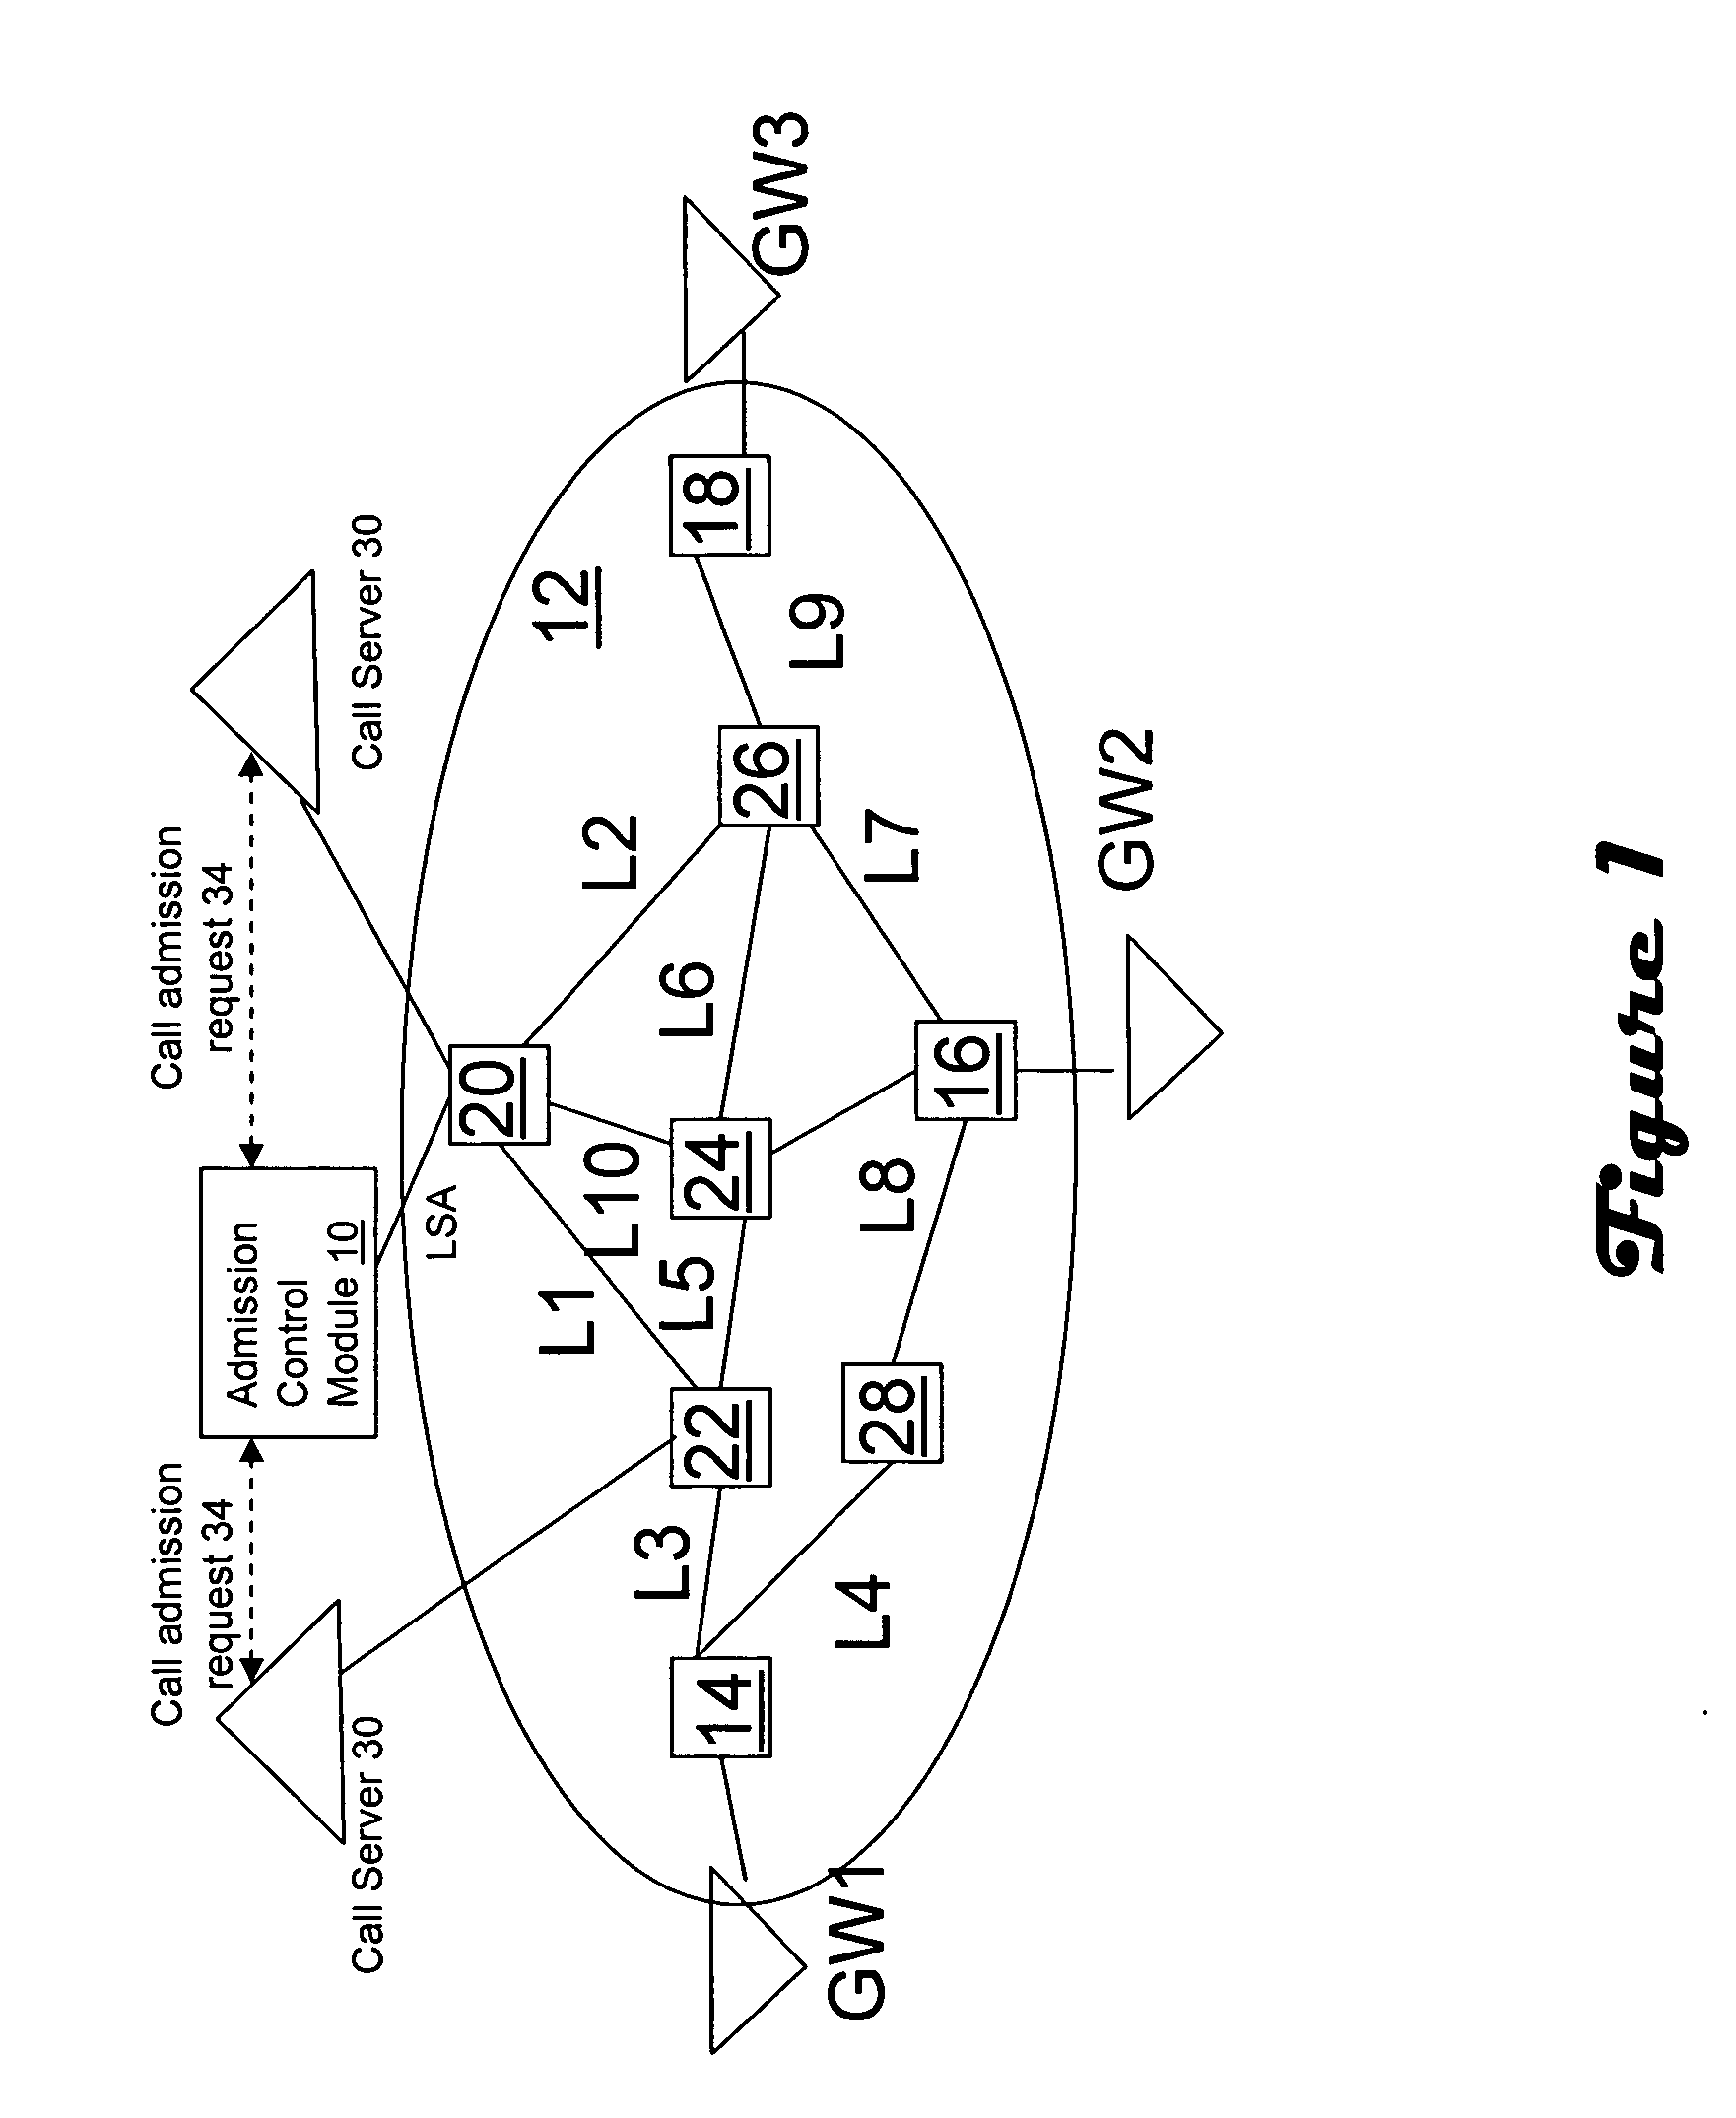 Flow admission control in an IP network